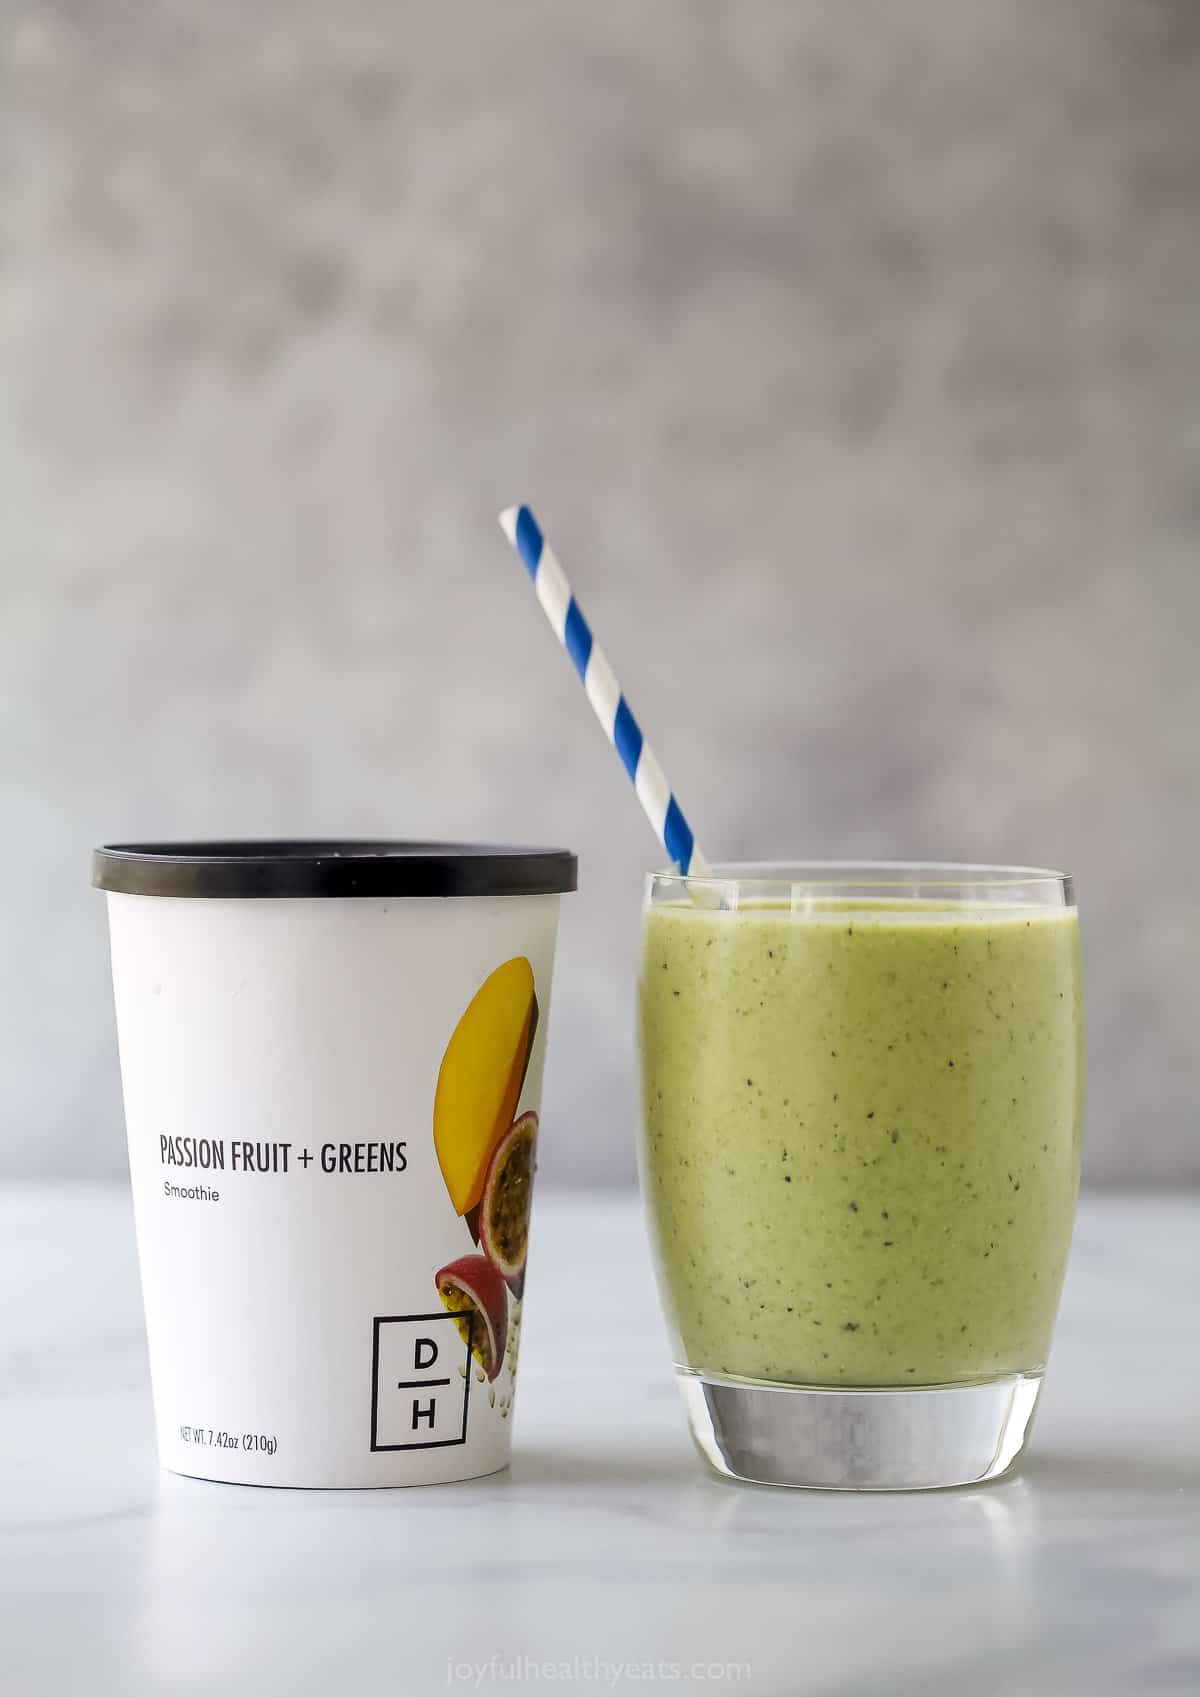 daily harvest passionfruit + greens smoothie